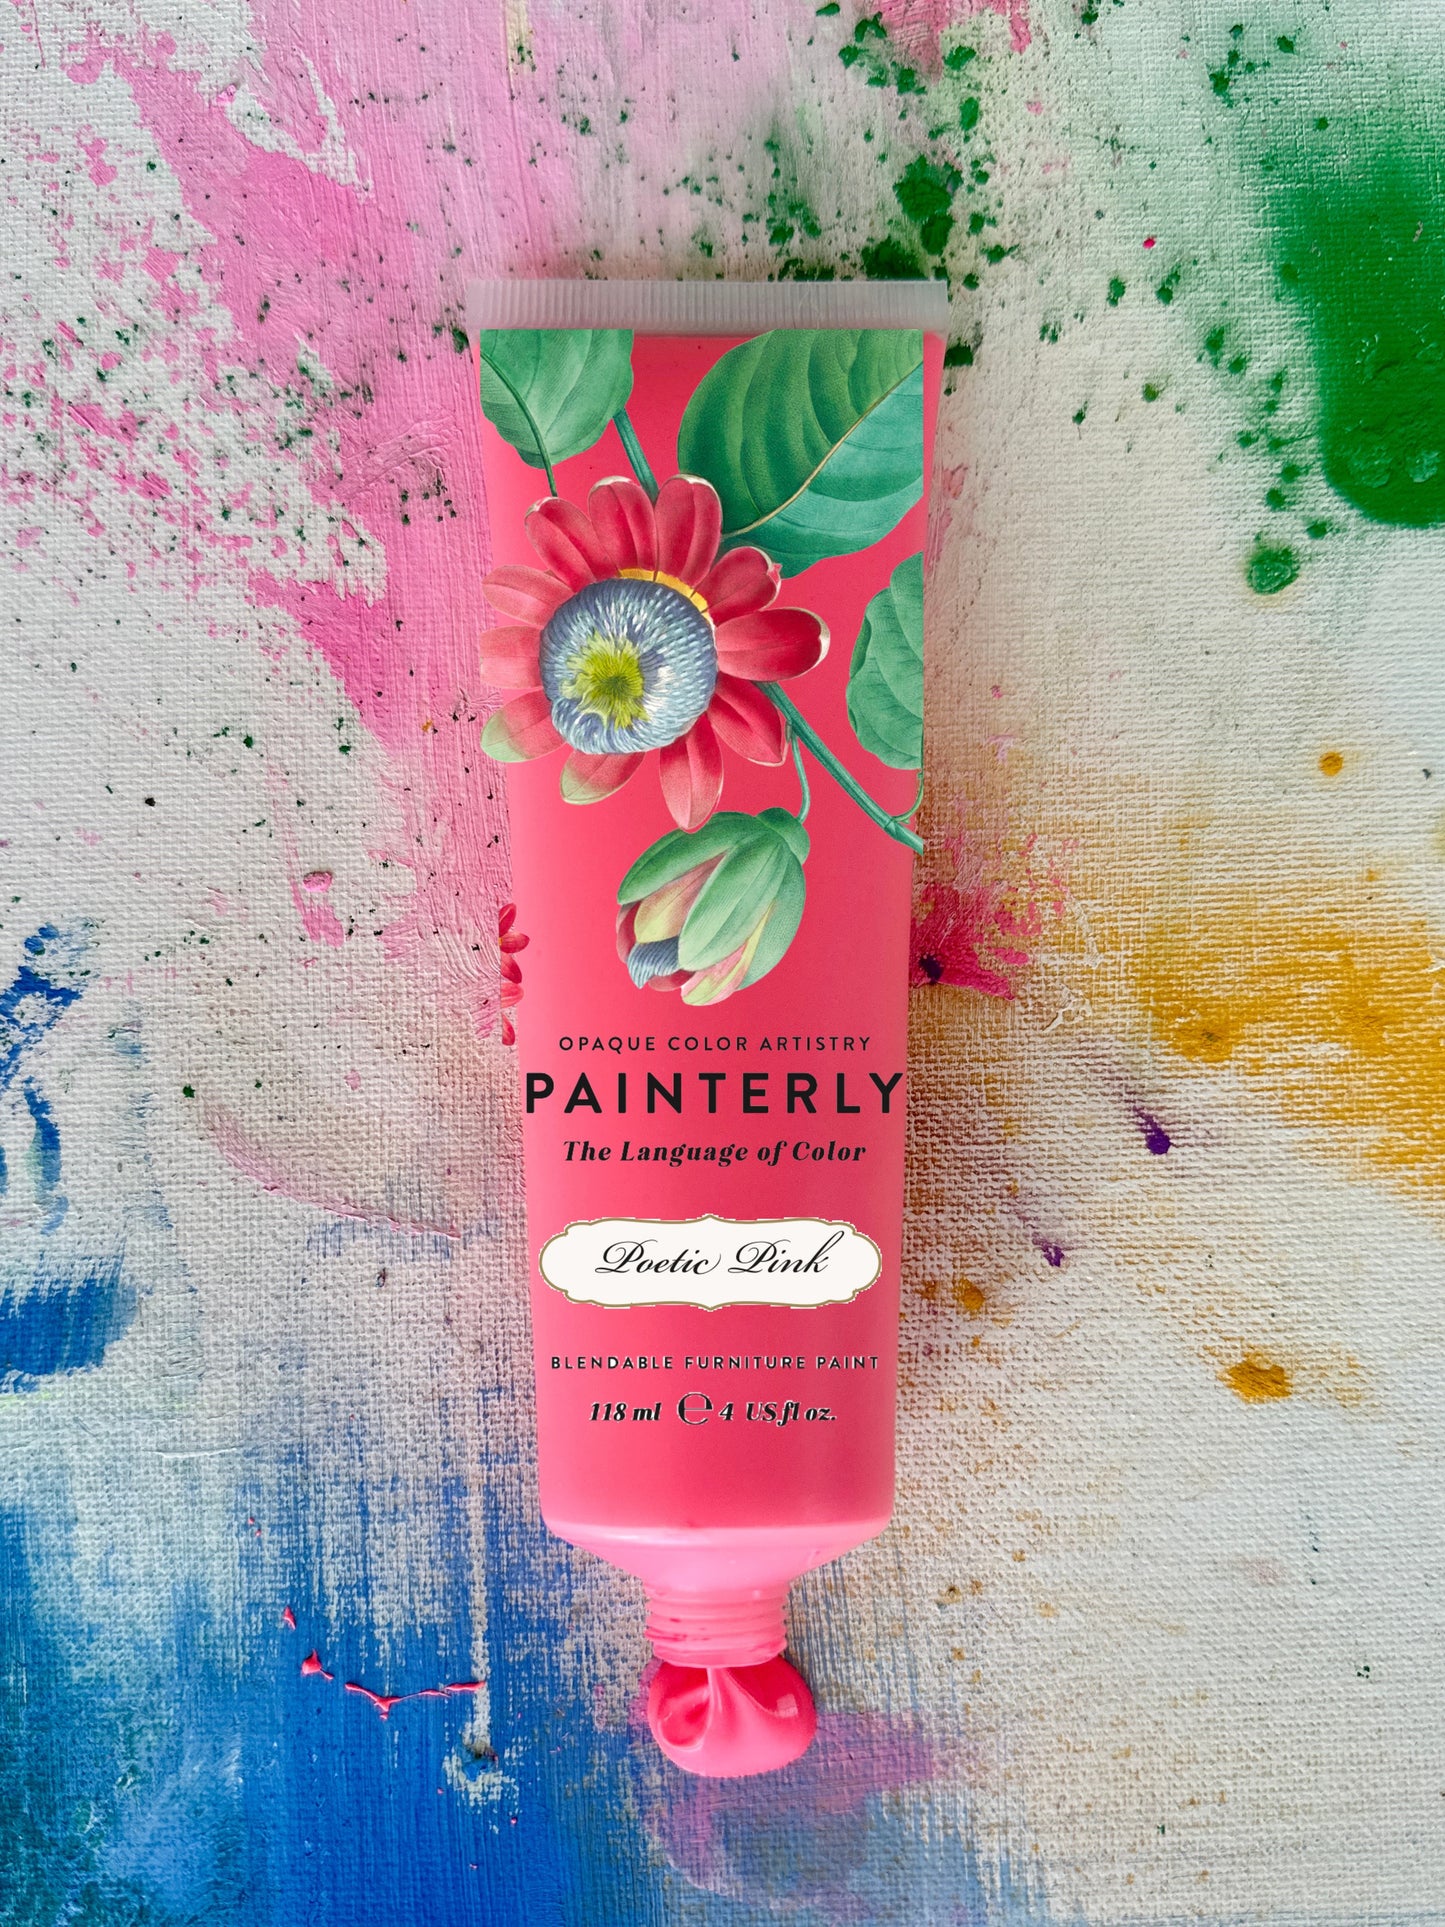 Poetic Pink Painterly Paint